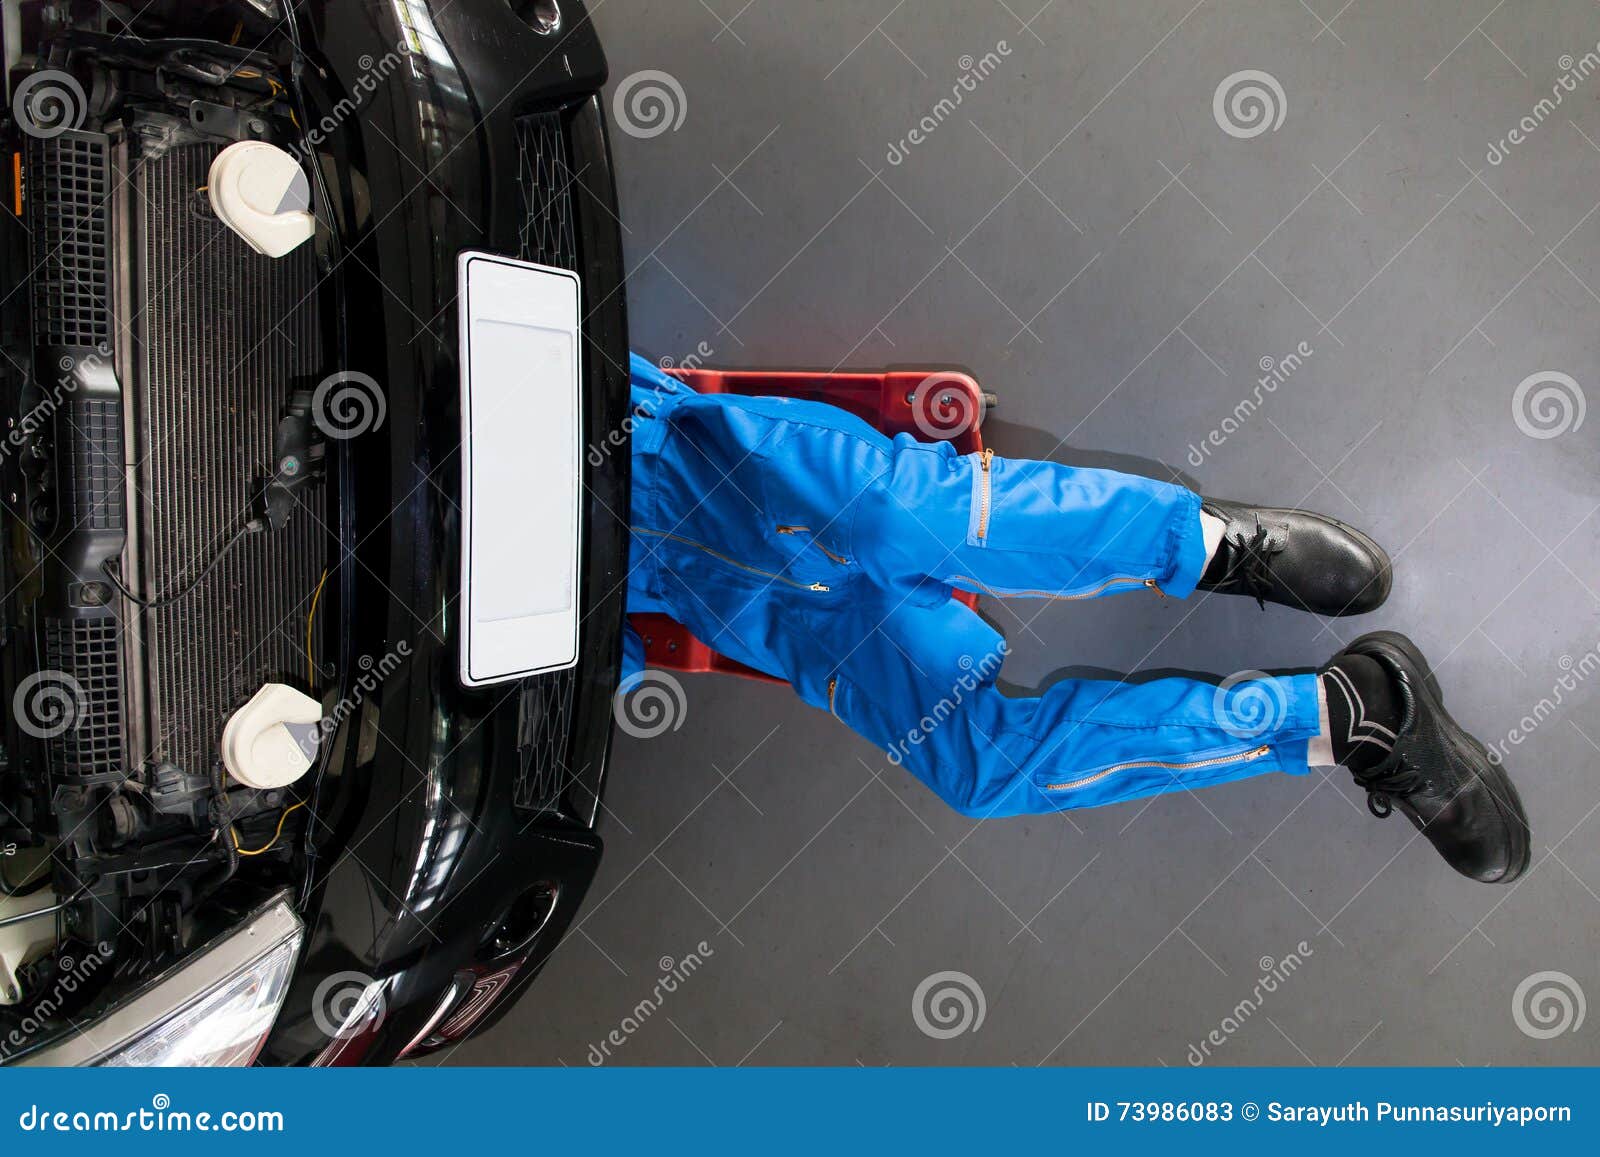 Mechanic In Blue Uniform Lying Down And Working Under Car At T